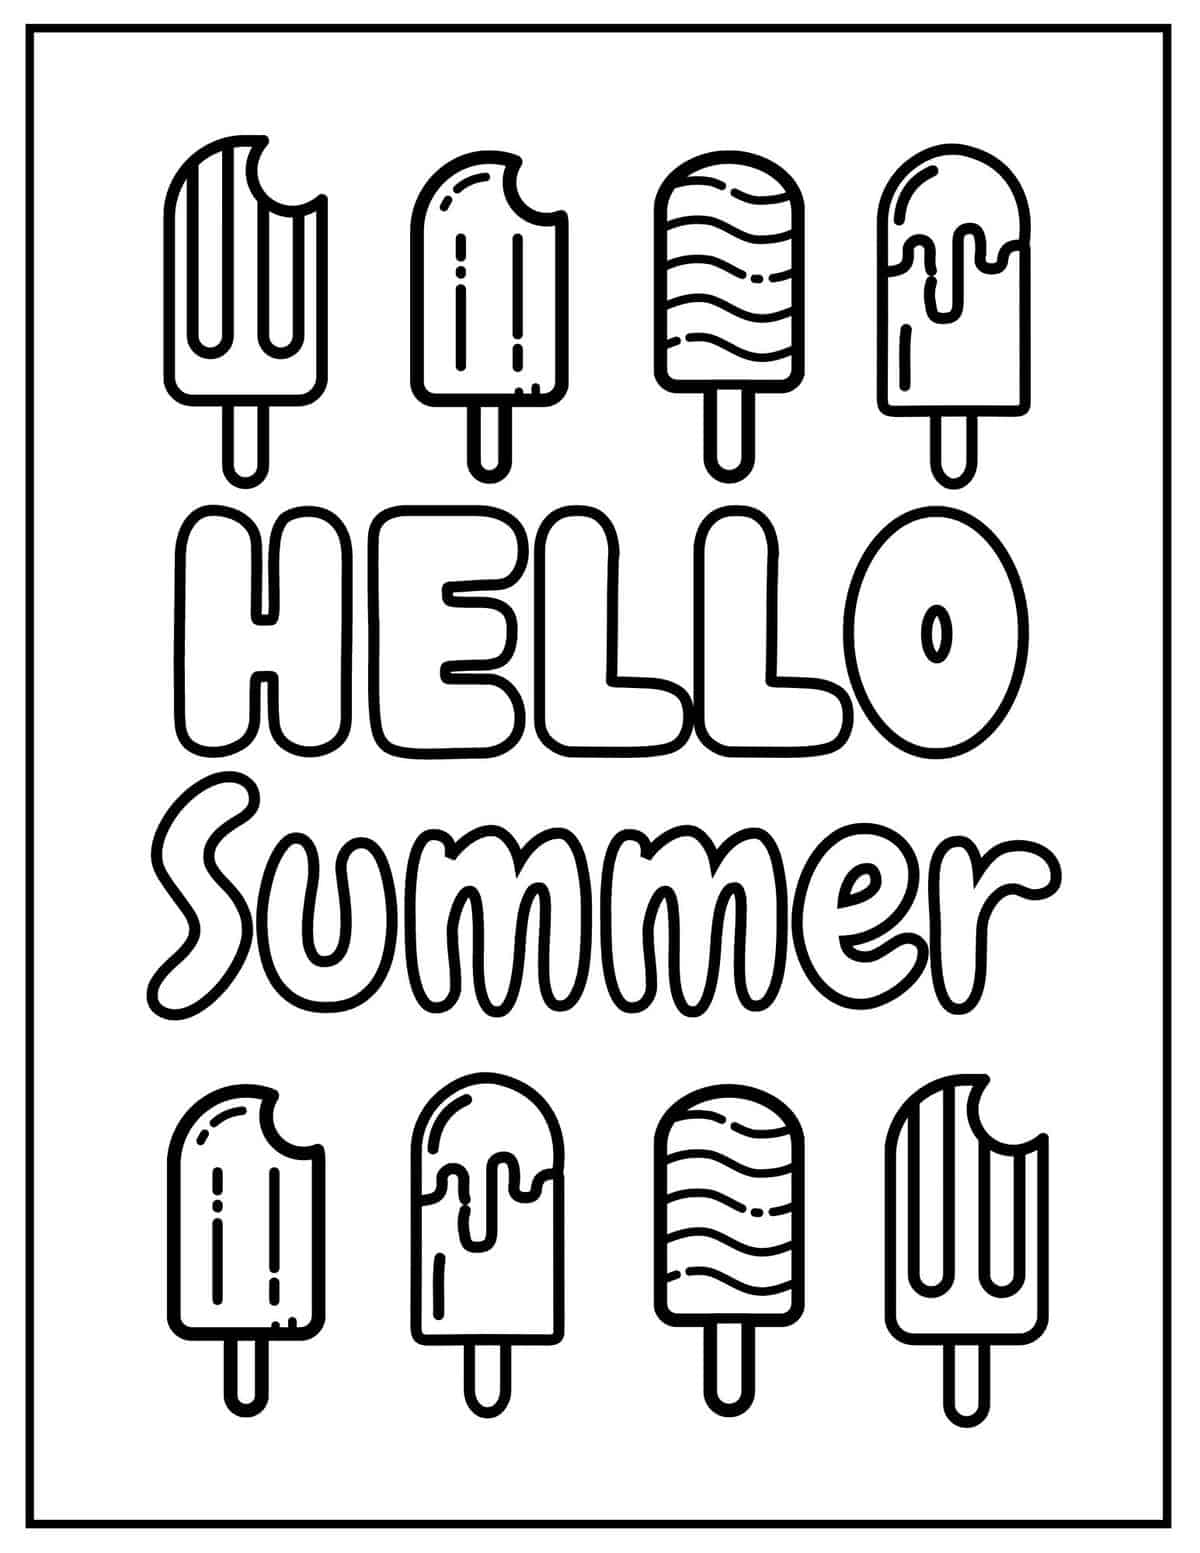 20 Free Summer Coloring Pages for Kids   Prudent Penny Pincher